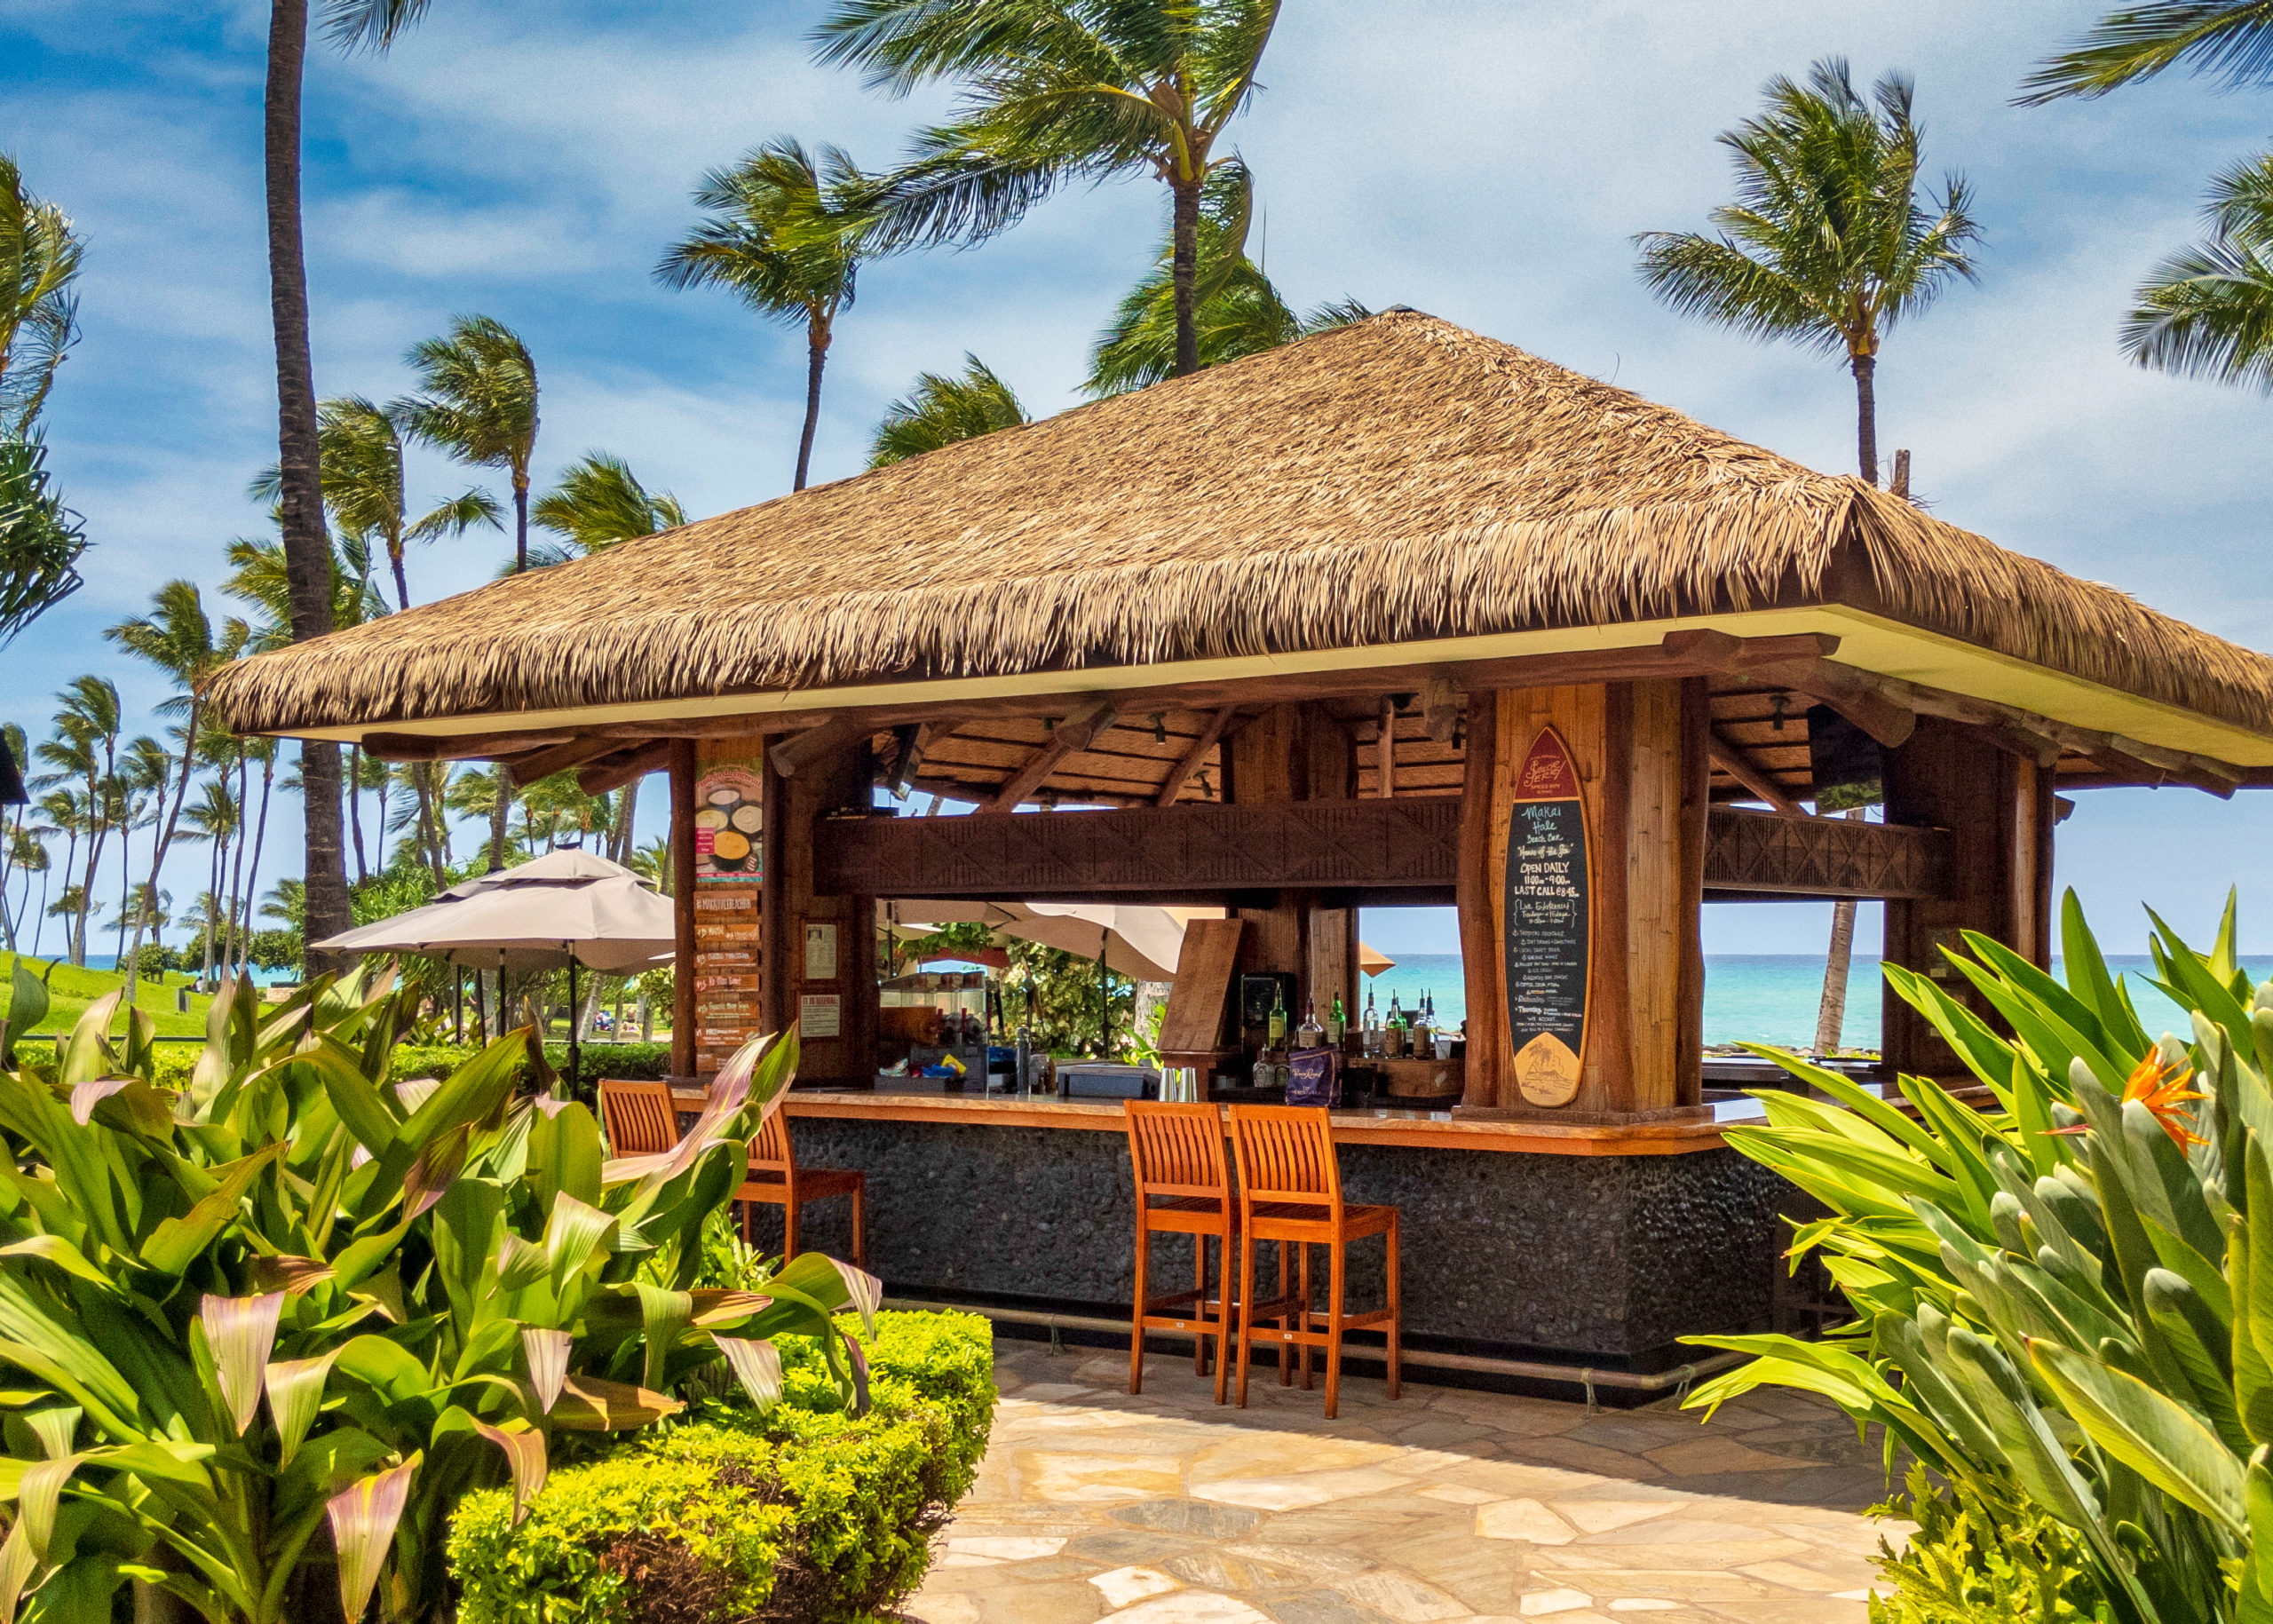 Picture of the Bar from Walkaway in our Ko Olina Beach Villas.